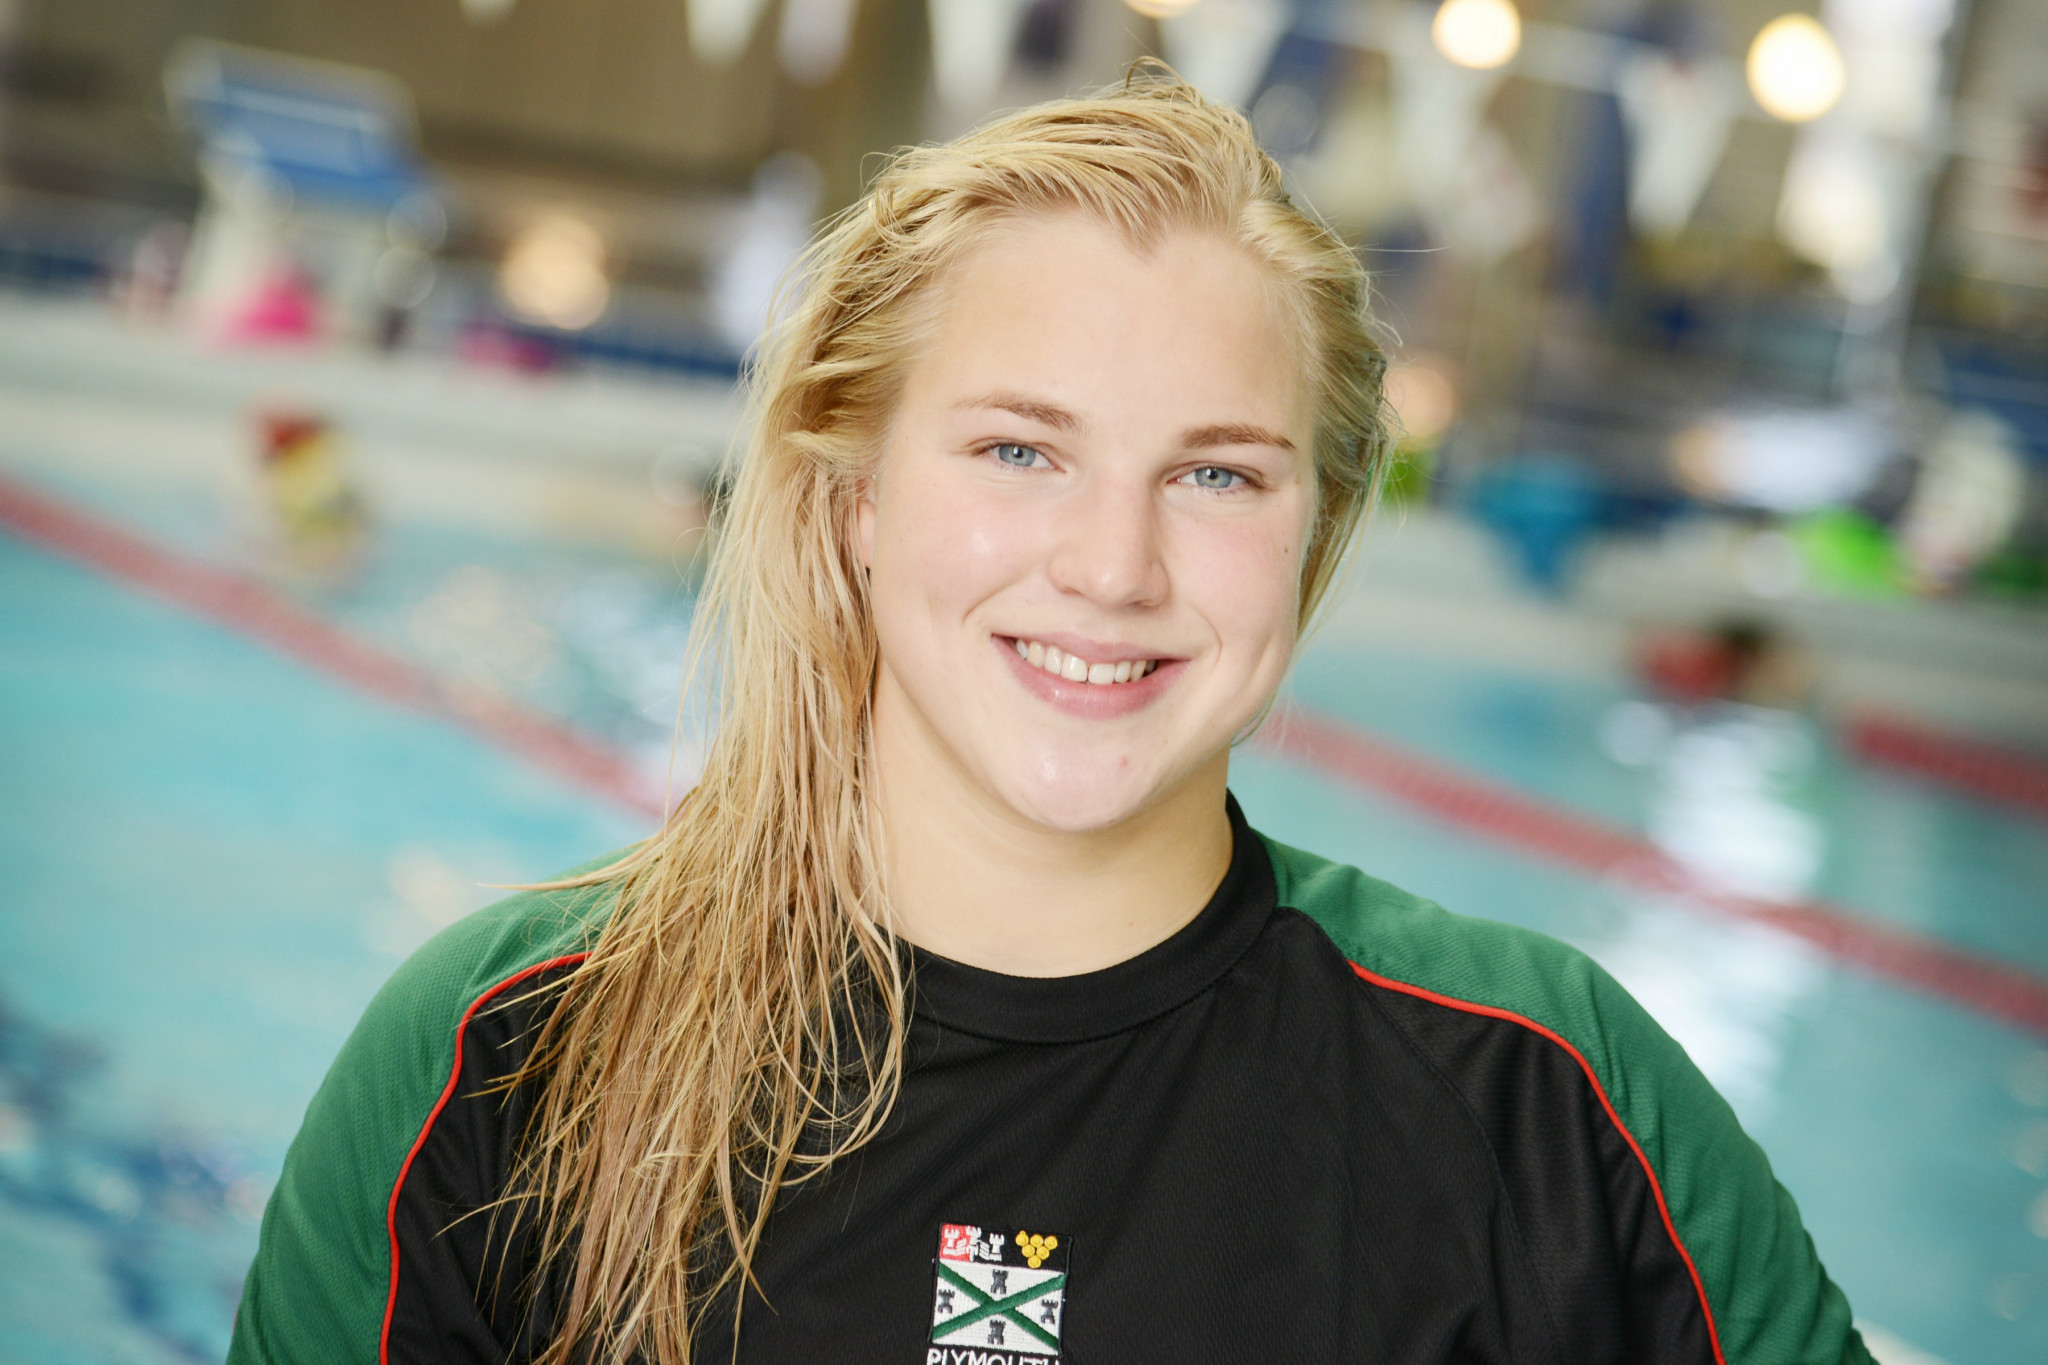 Rūta Meilutytė was a student at Plymouth College in the United Kingdom when she won her Olympic gold medal in the 100m breaststroke at London 2012 ©Plymouth College